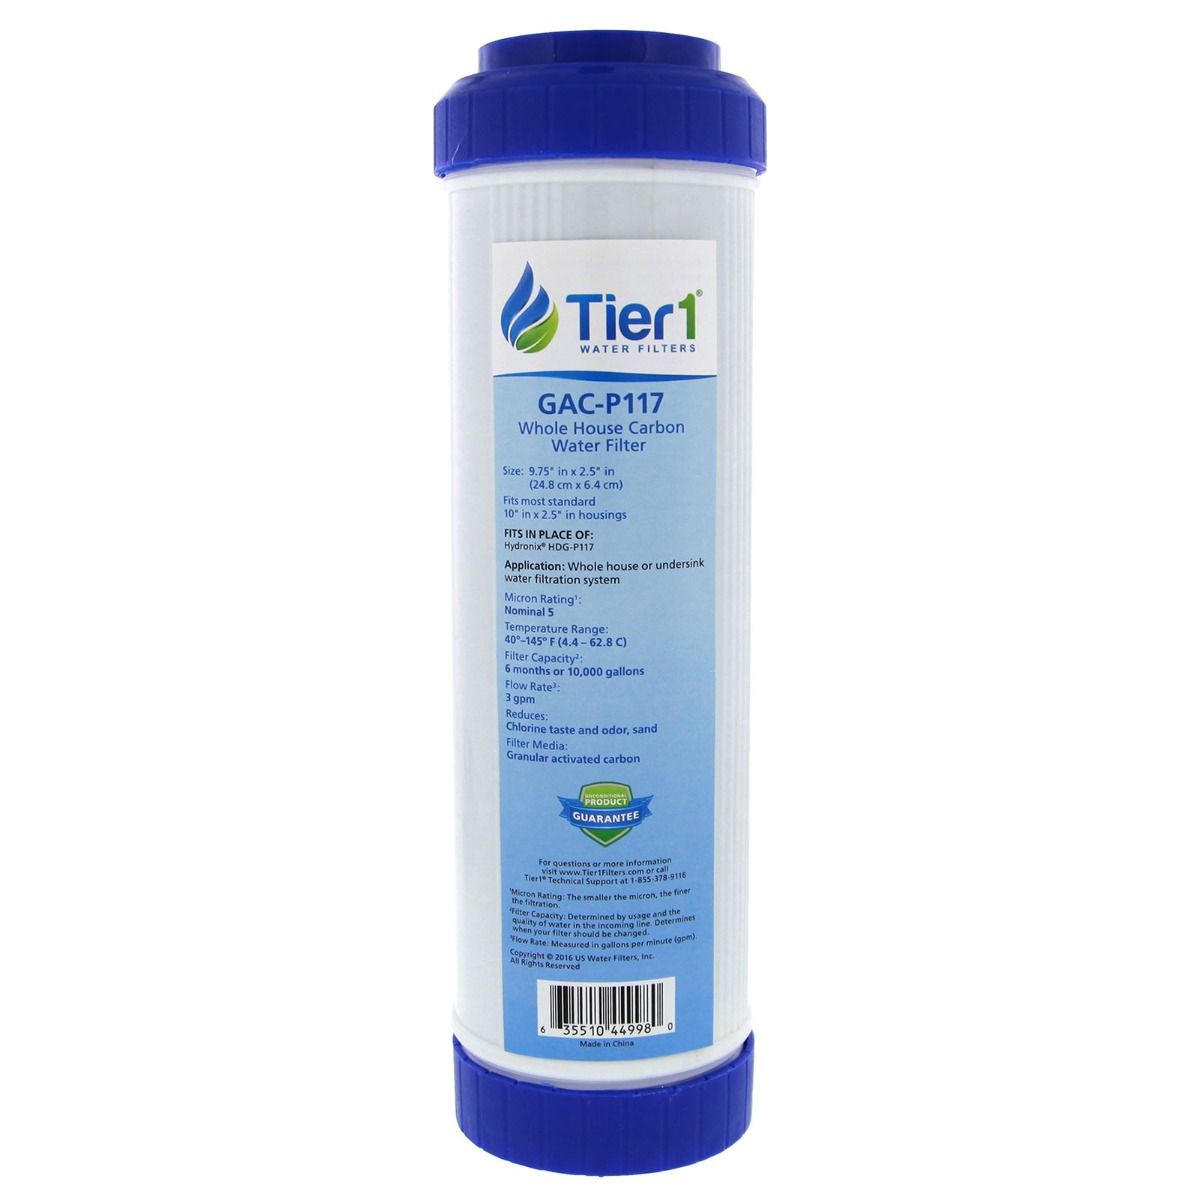 GAC-P117 Comparable Whole House Replacement Water Filter by Tier1